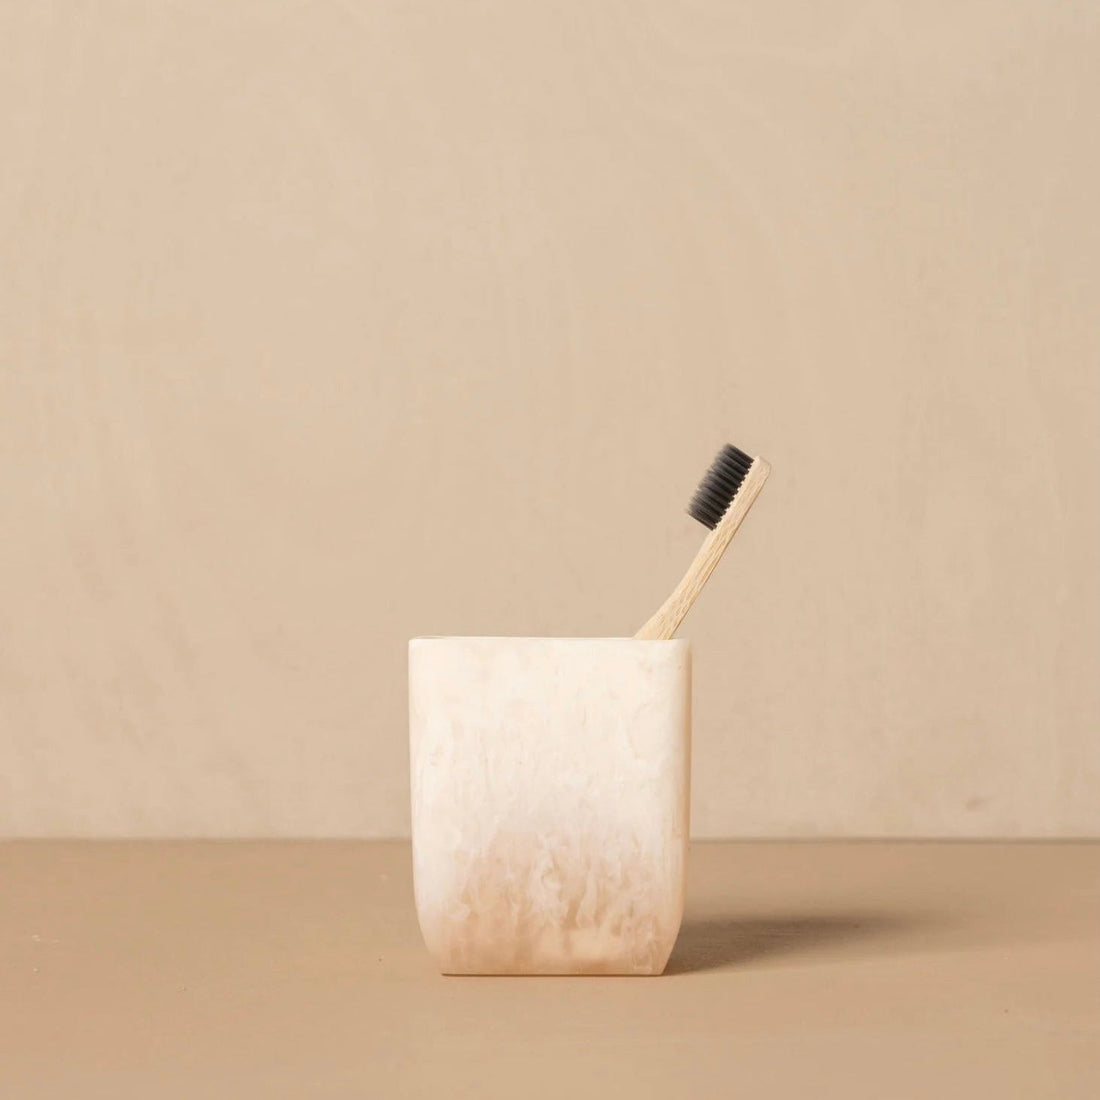 Flow Resin Toothbrush Holder - Peach Blush - The Flower Crate